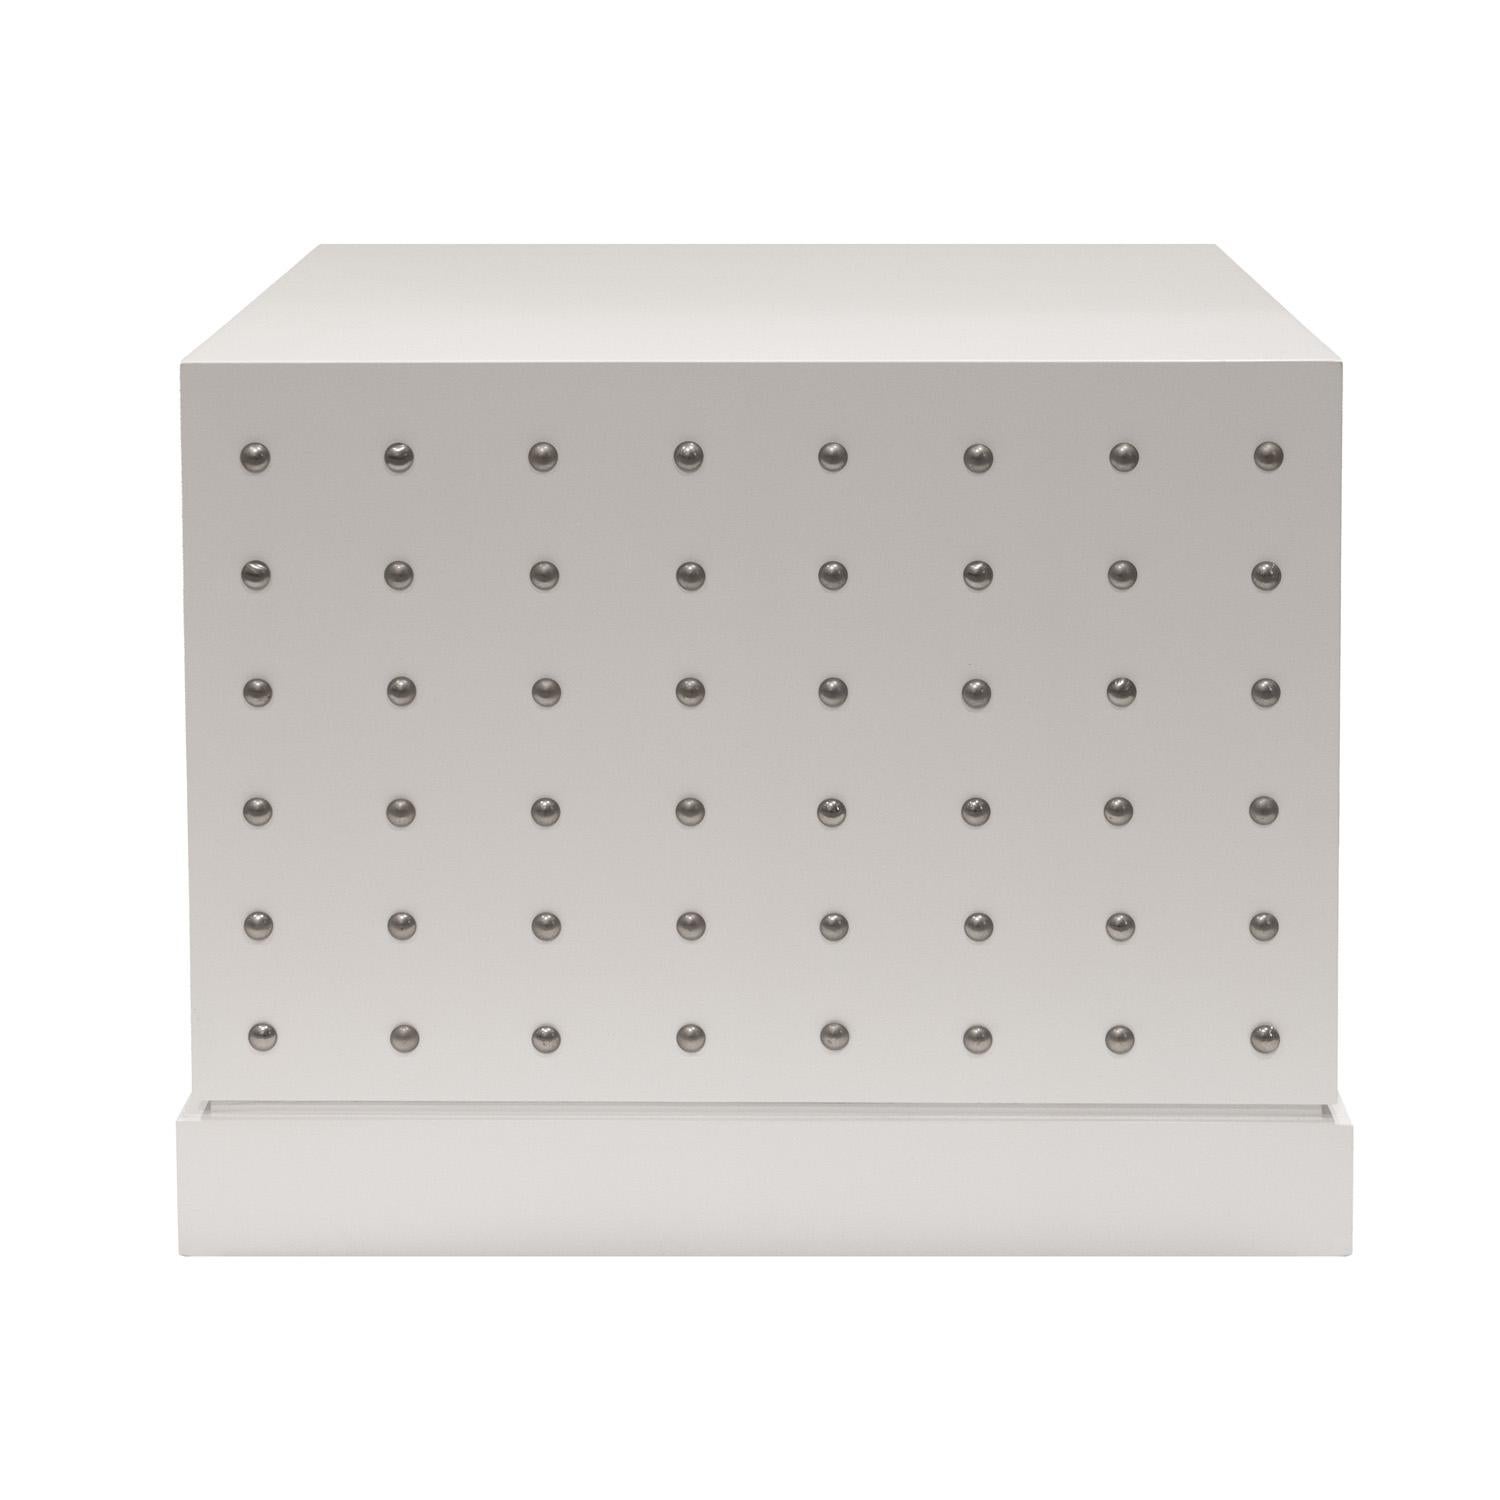 Hand-Crafted Tommi Parzinger Iconic Studded Small Chest/Bedside Table 1981 For Sale